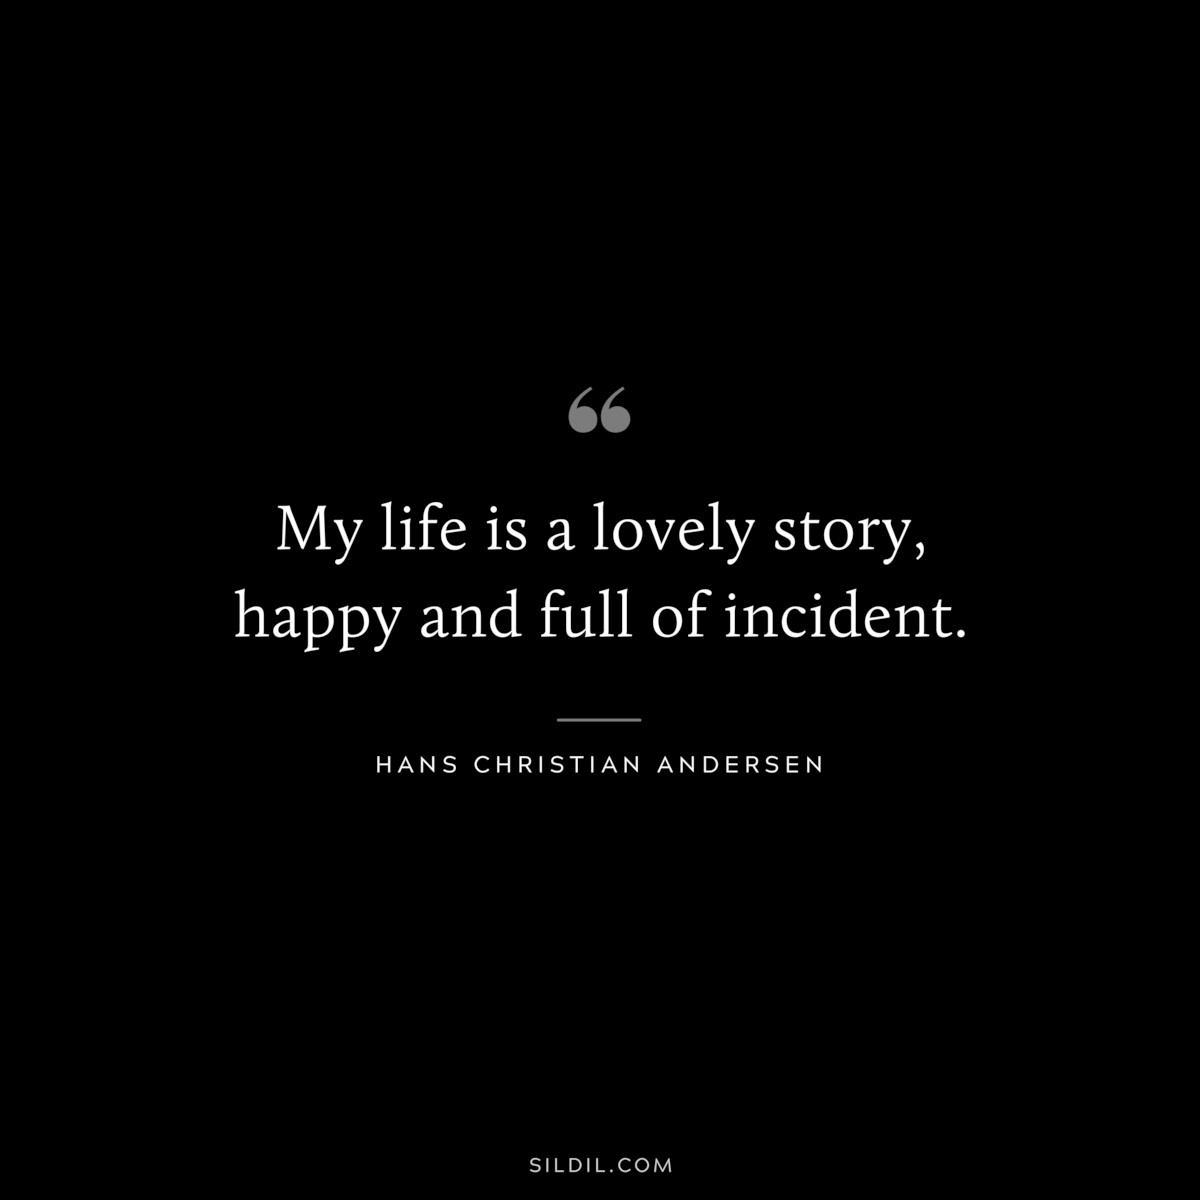 My life is a lovely story, happy and full of incident. ― Hans Christian Andersen